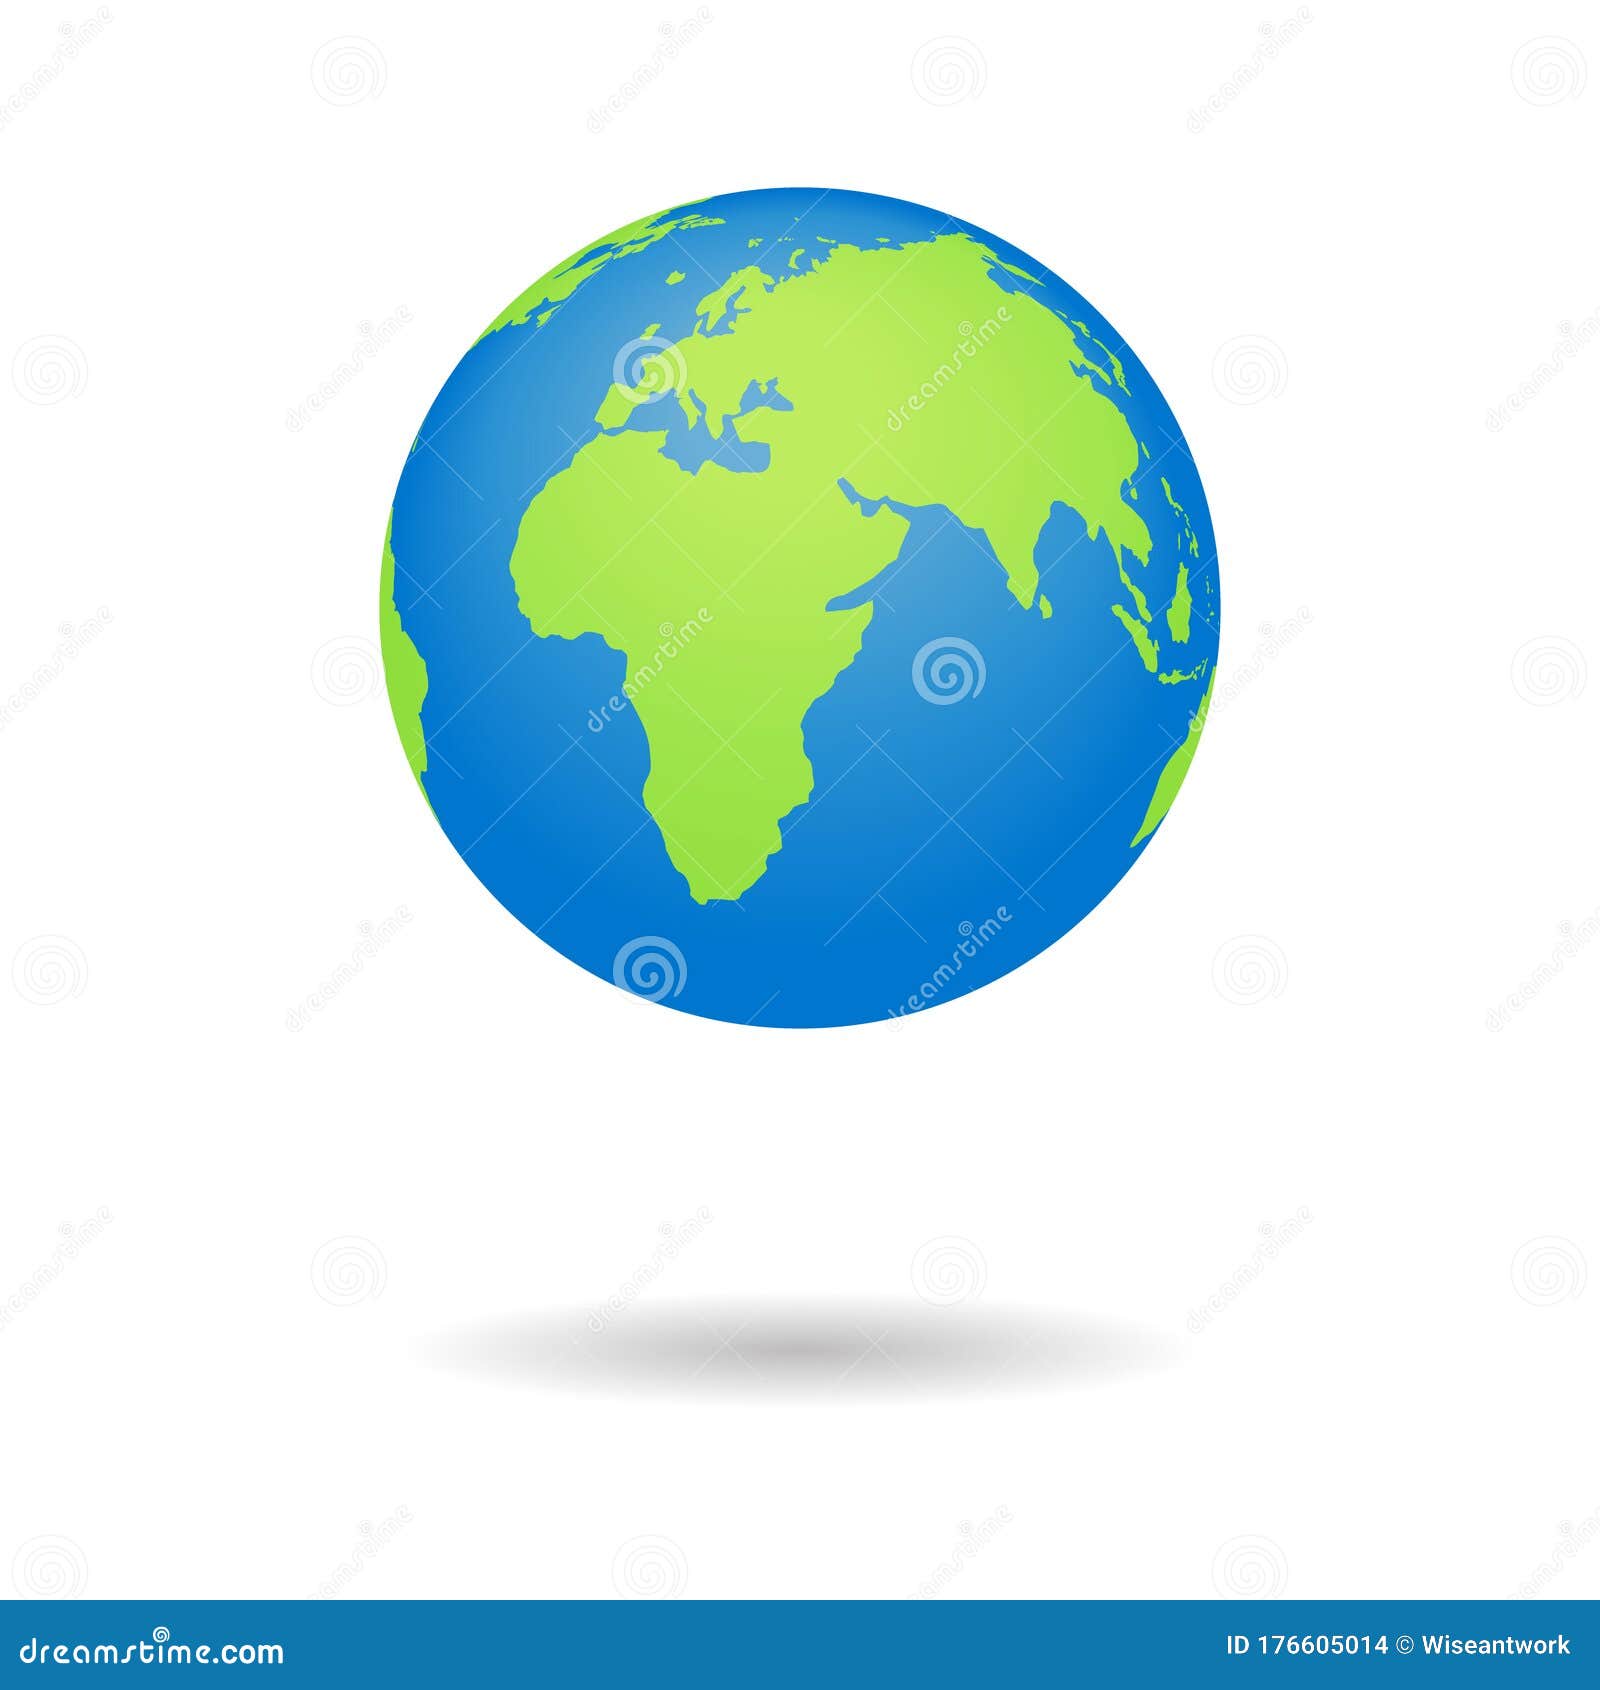 Earth Globus Map. 3D Globe World Symbol with Green Color Isolated on White Background. Individual Continents Stock Vector - Illustration of globus, india: 176605014